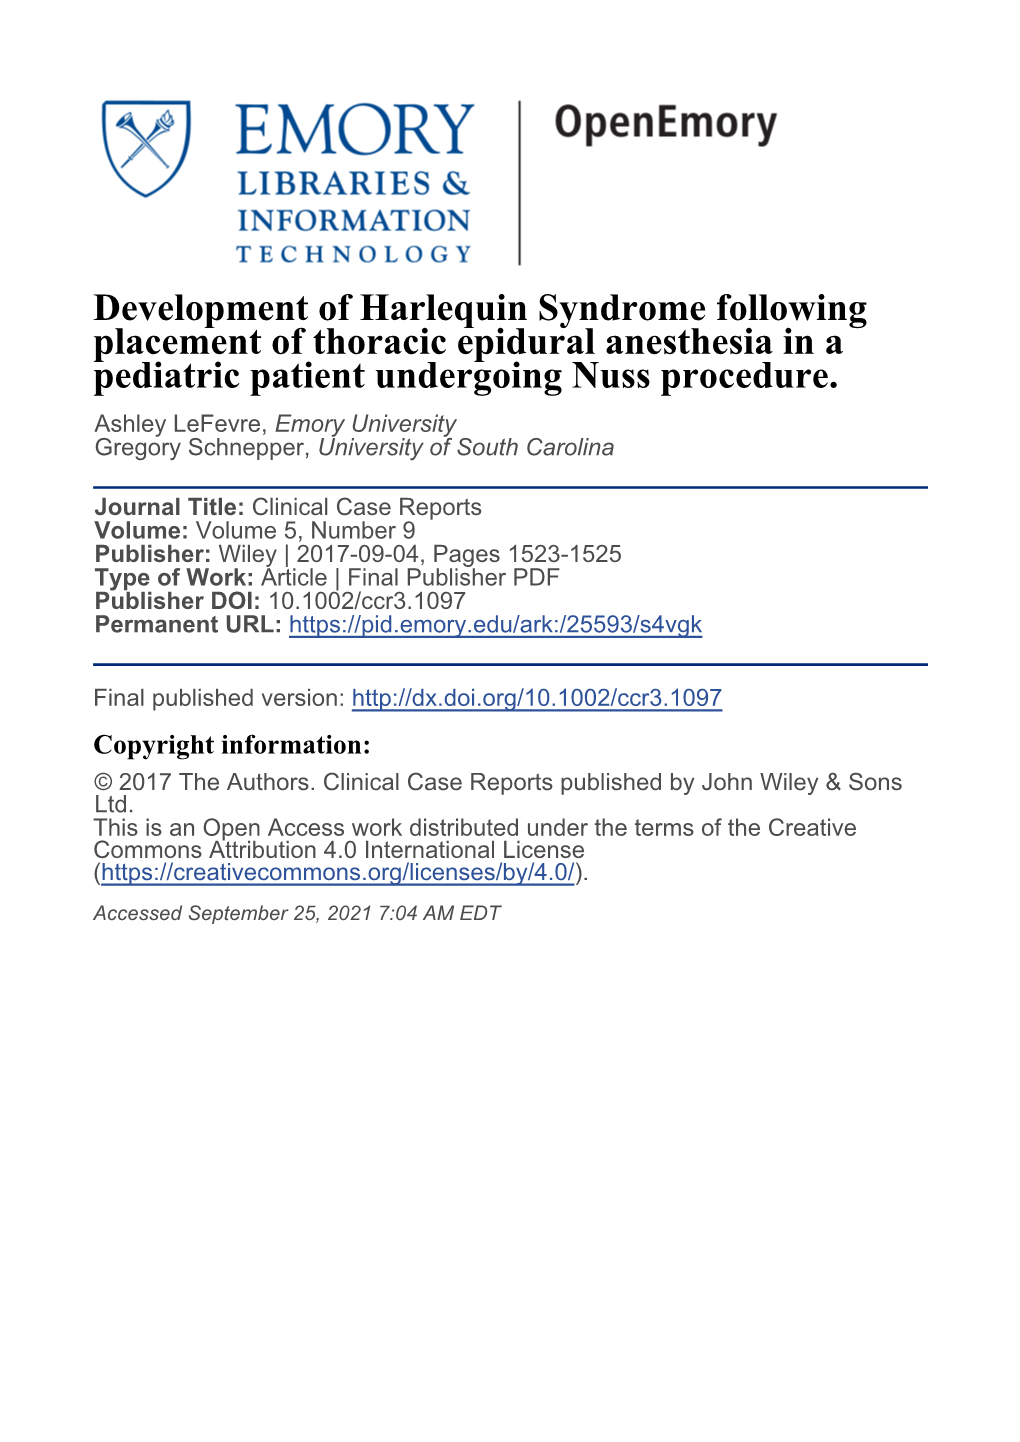 Development of Harlequin Syndrome Following Placement of Thoracic Epidural Anesthesia in a Pediatric Patient Undergoing Nuss Procedure